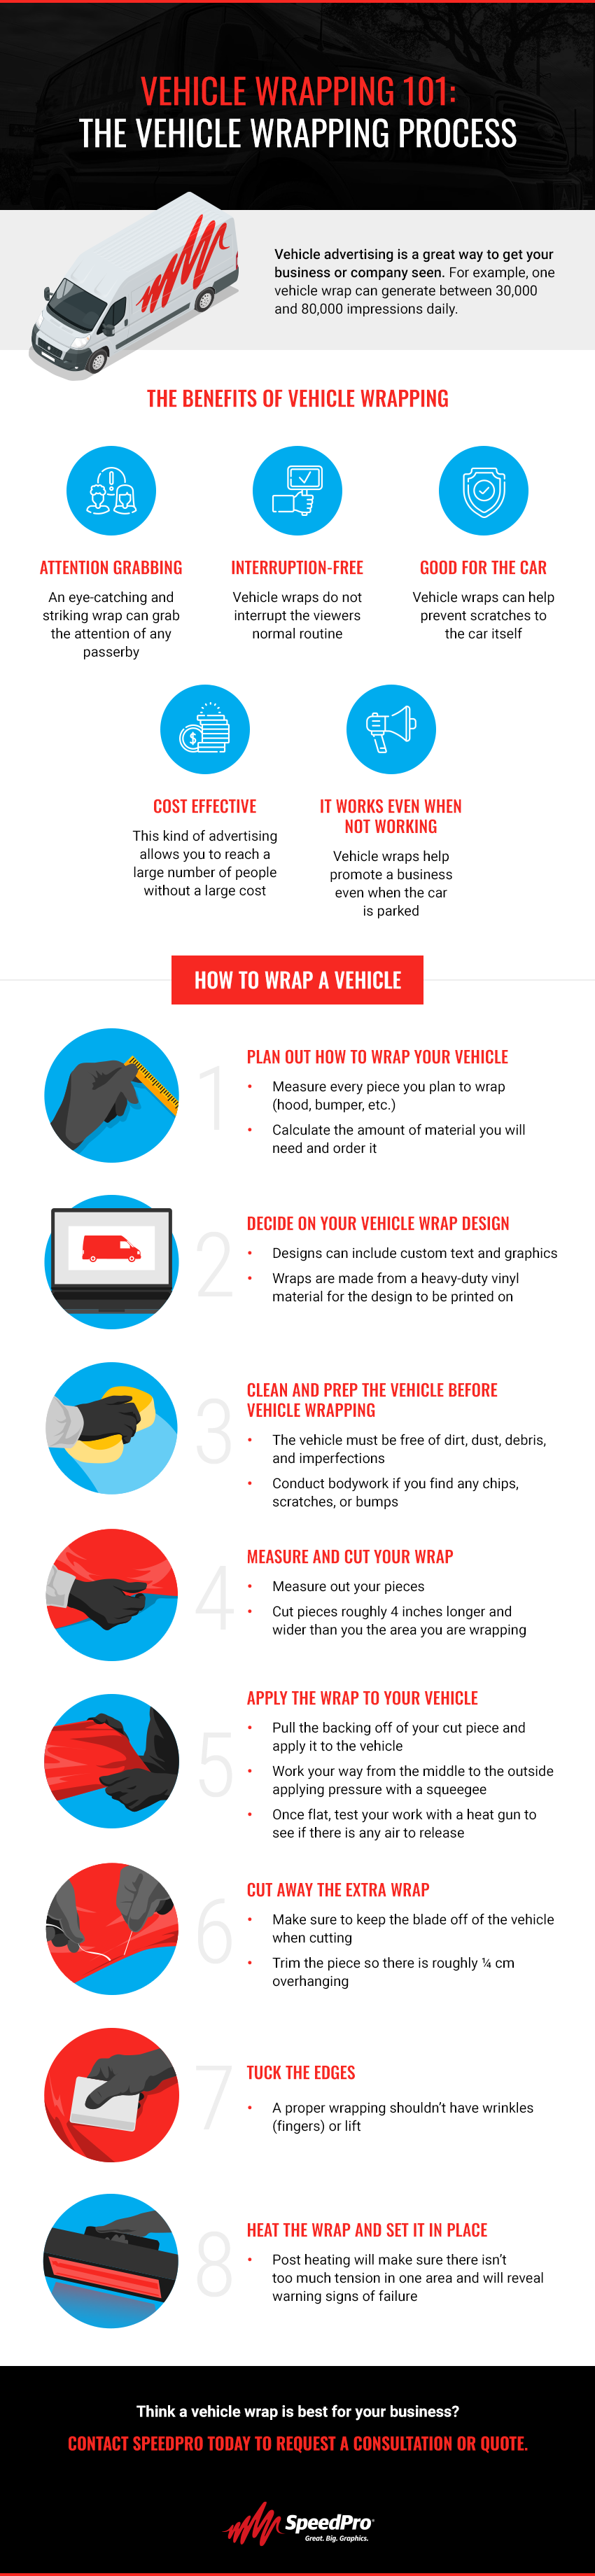 Vehicle Wrapping 101 [Infographic]